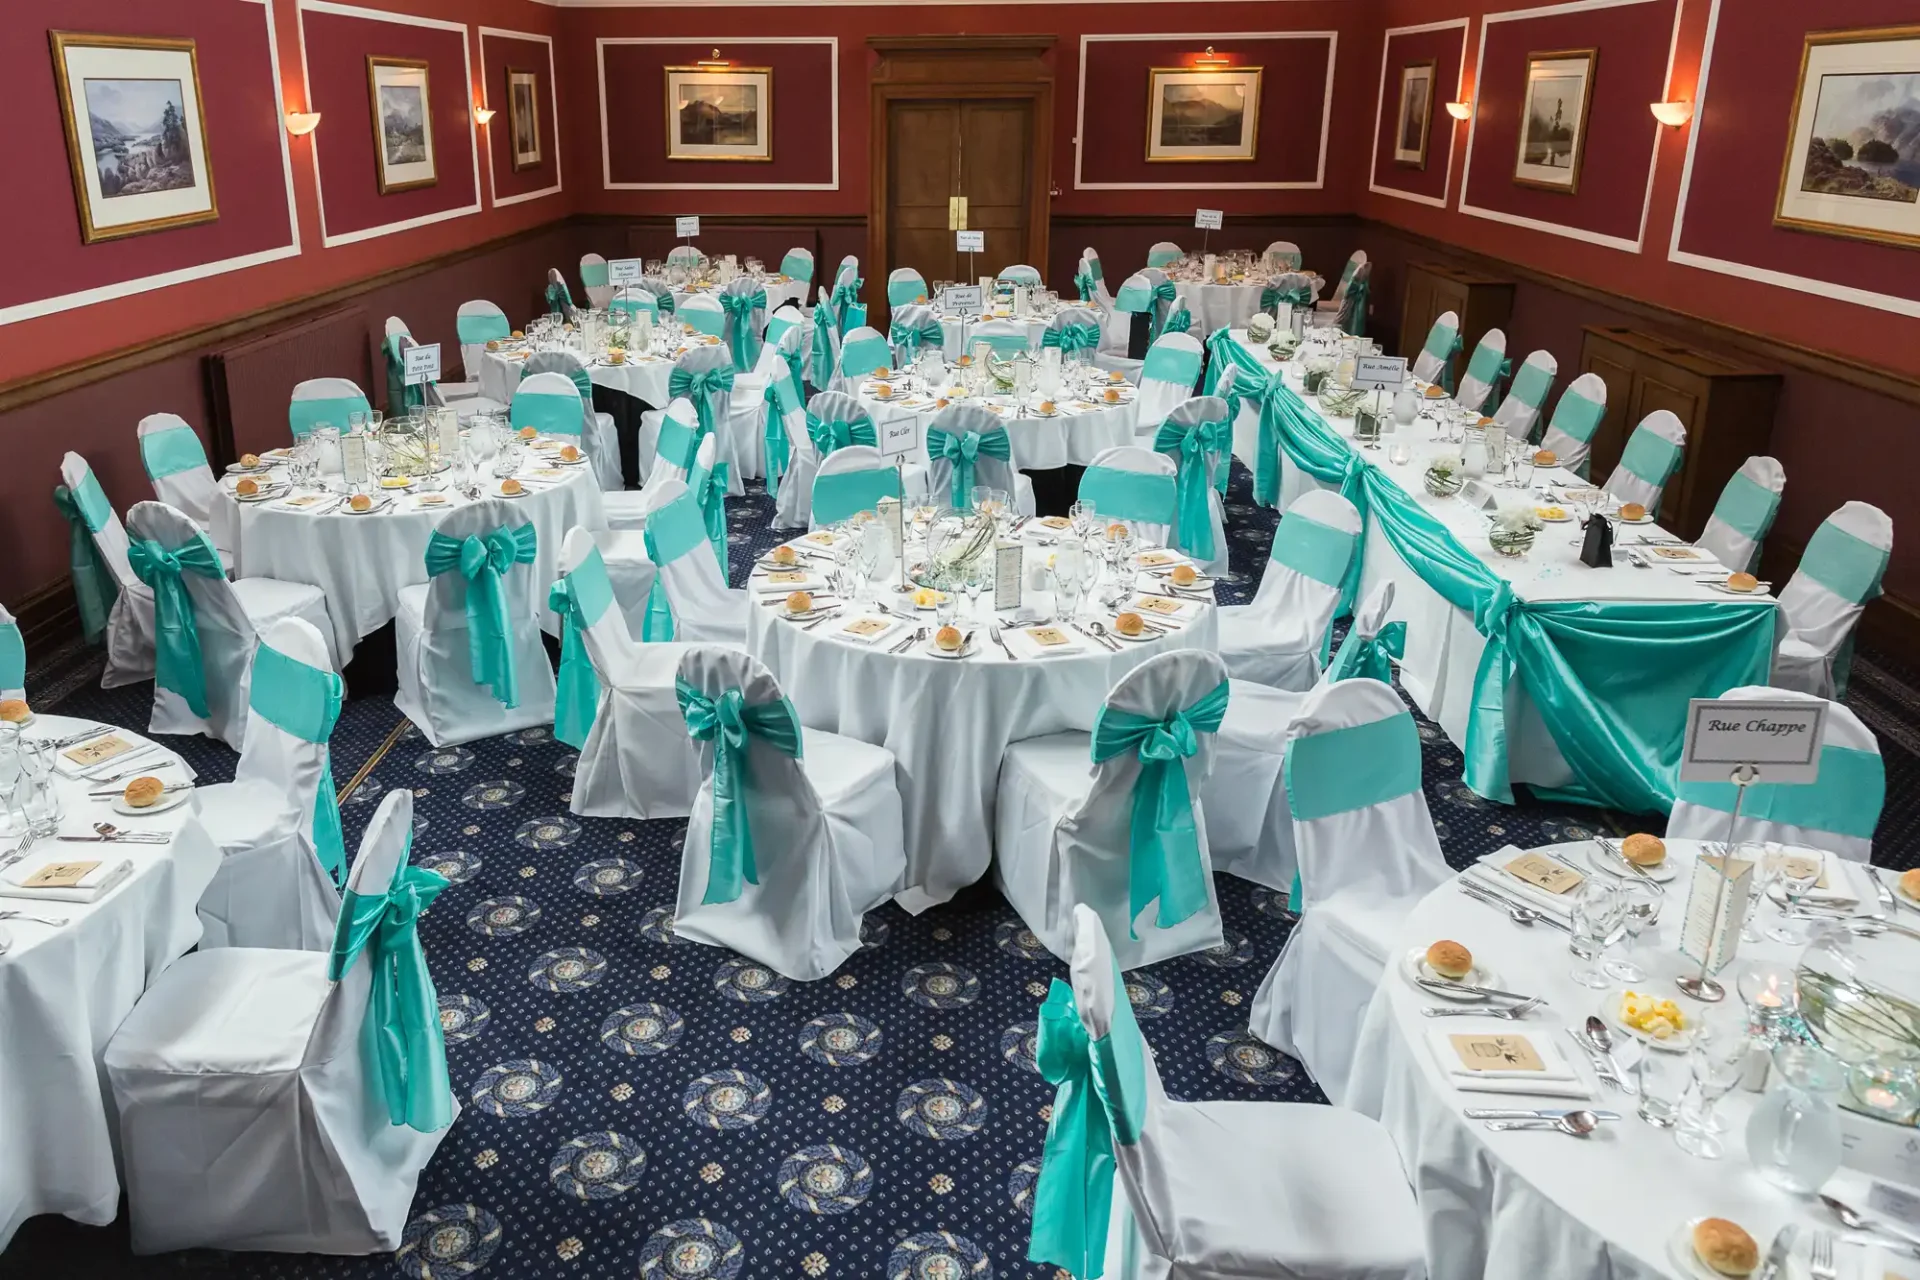 Elegant dining hall set for an event with round tables, white chairs adorned with teal sashes, and formal table settings.